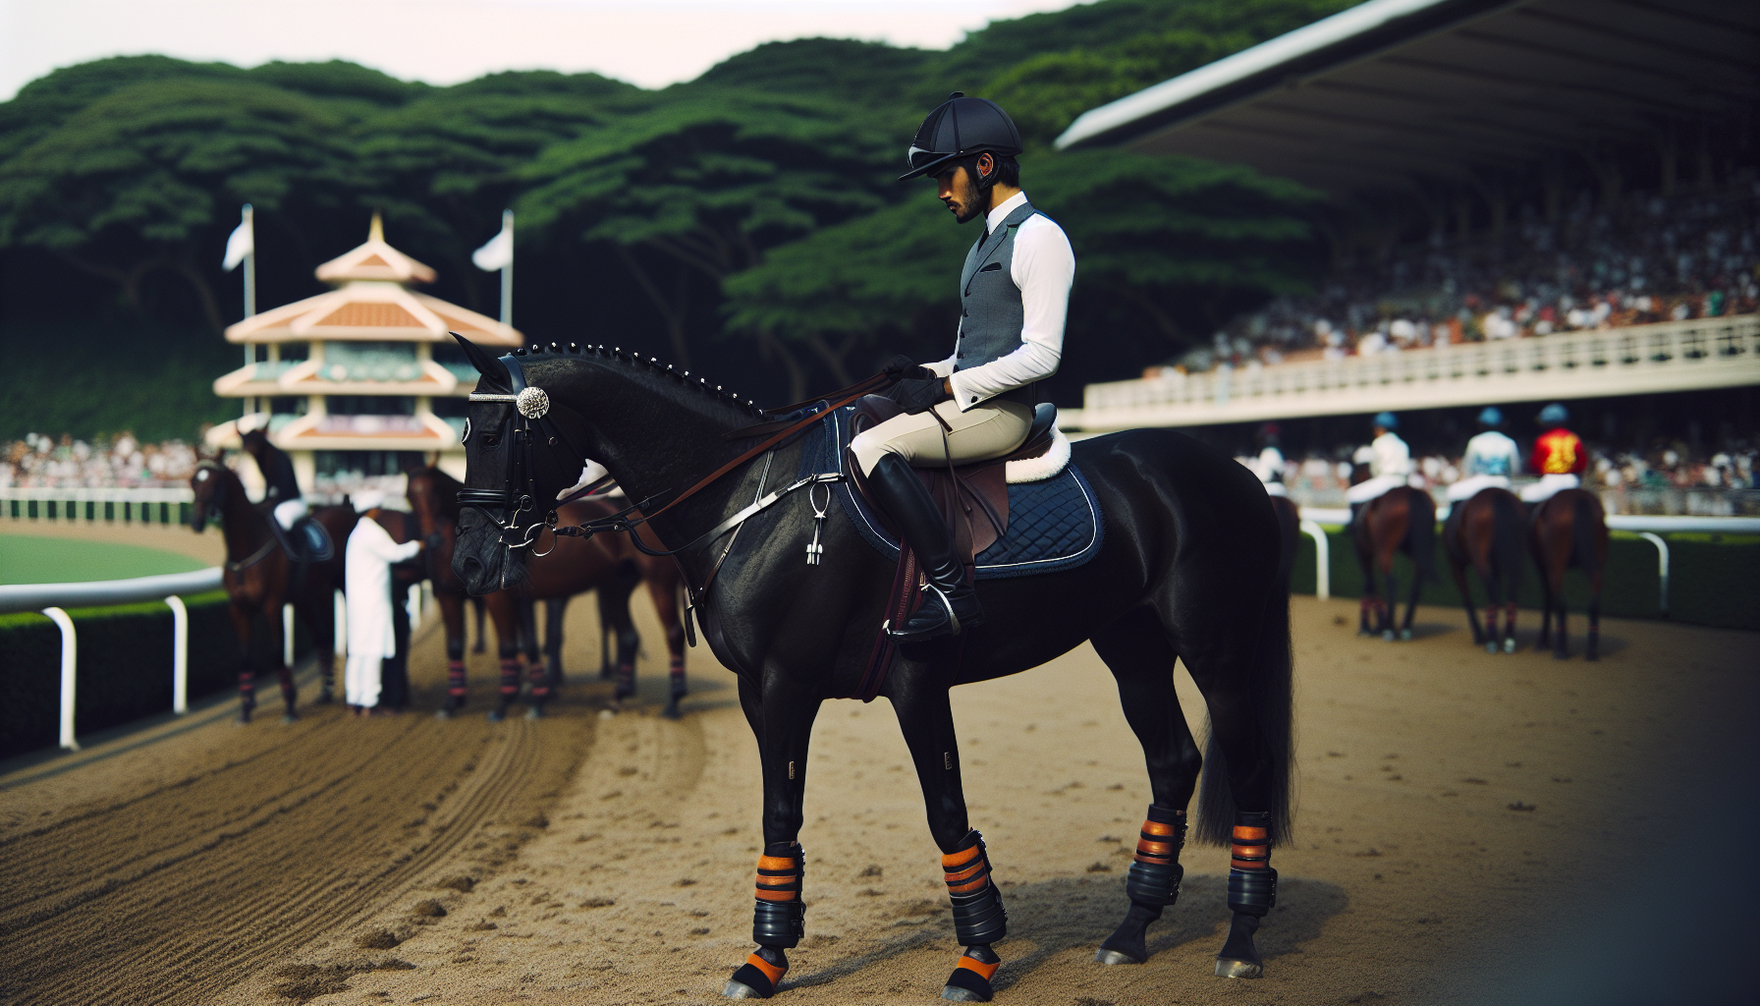 An image showcasing a scene from a horse race track. The focus is on a South Asian male rider, elegantly dressed in well-coordinated equestrian attire, from a riding helmet to boots. He is seen prepar